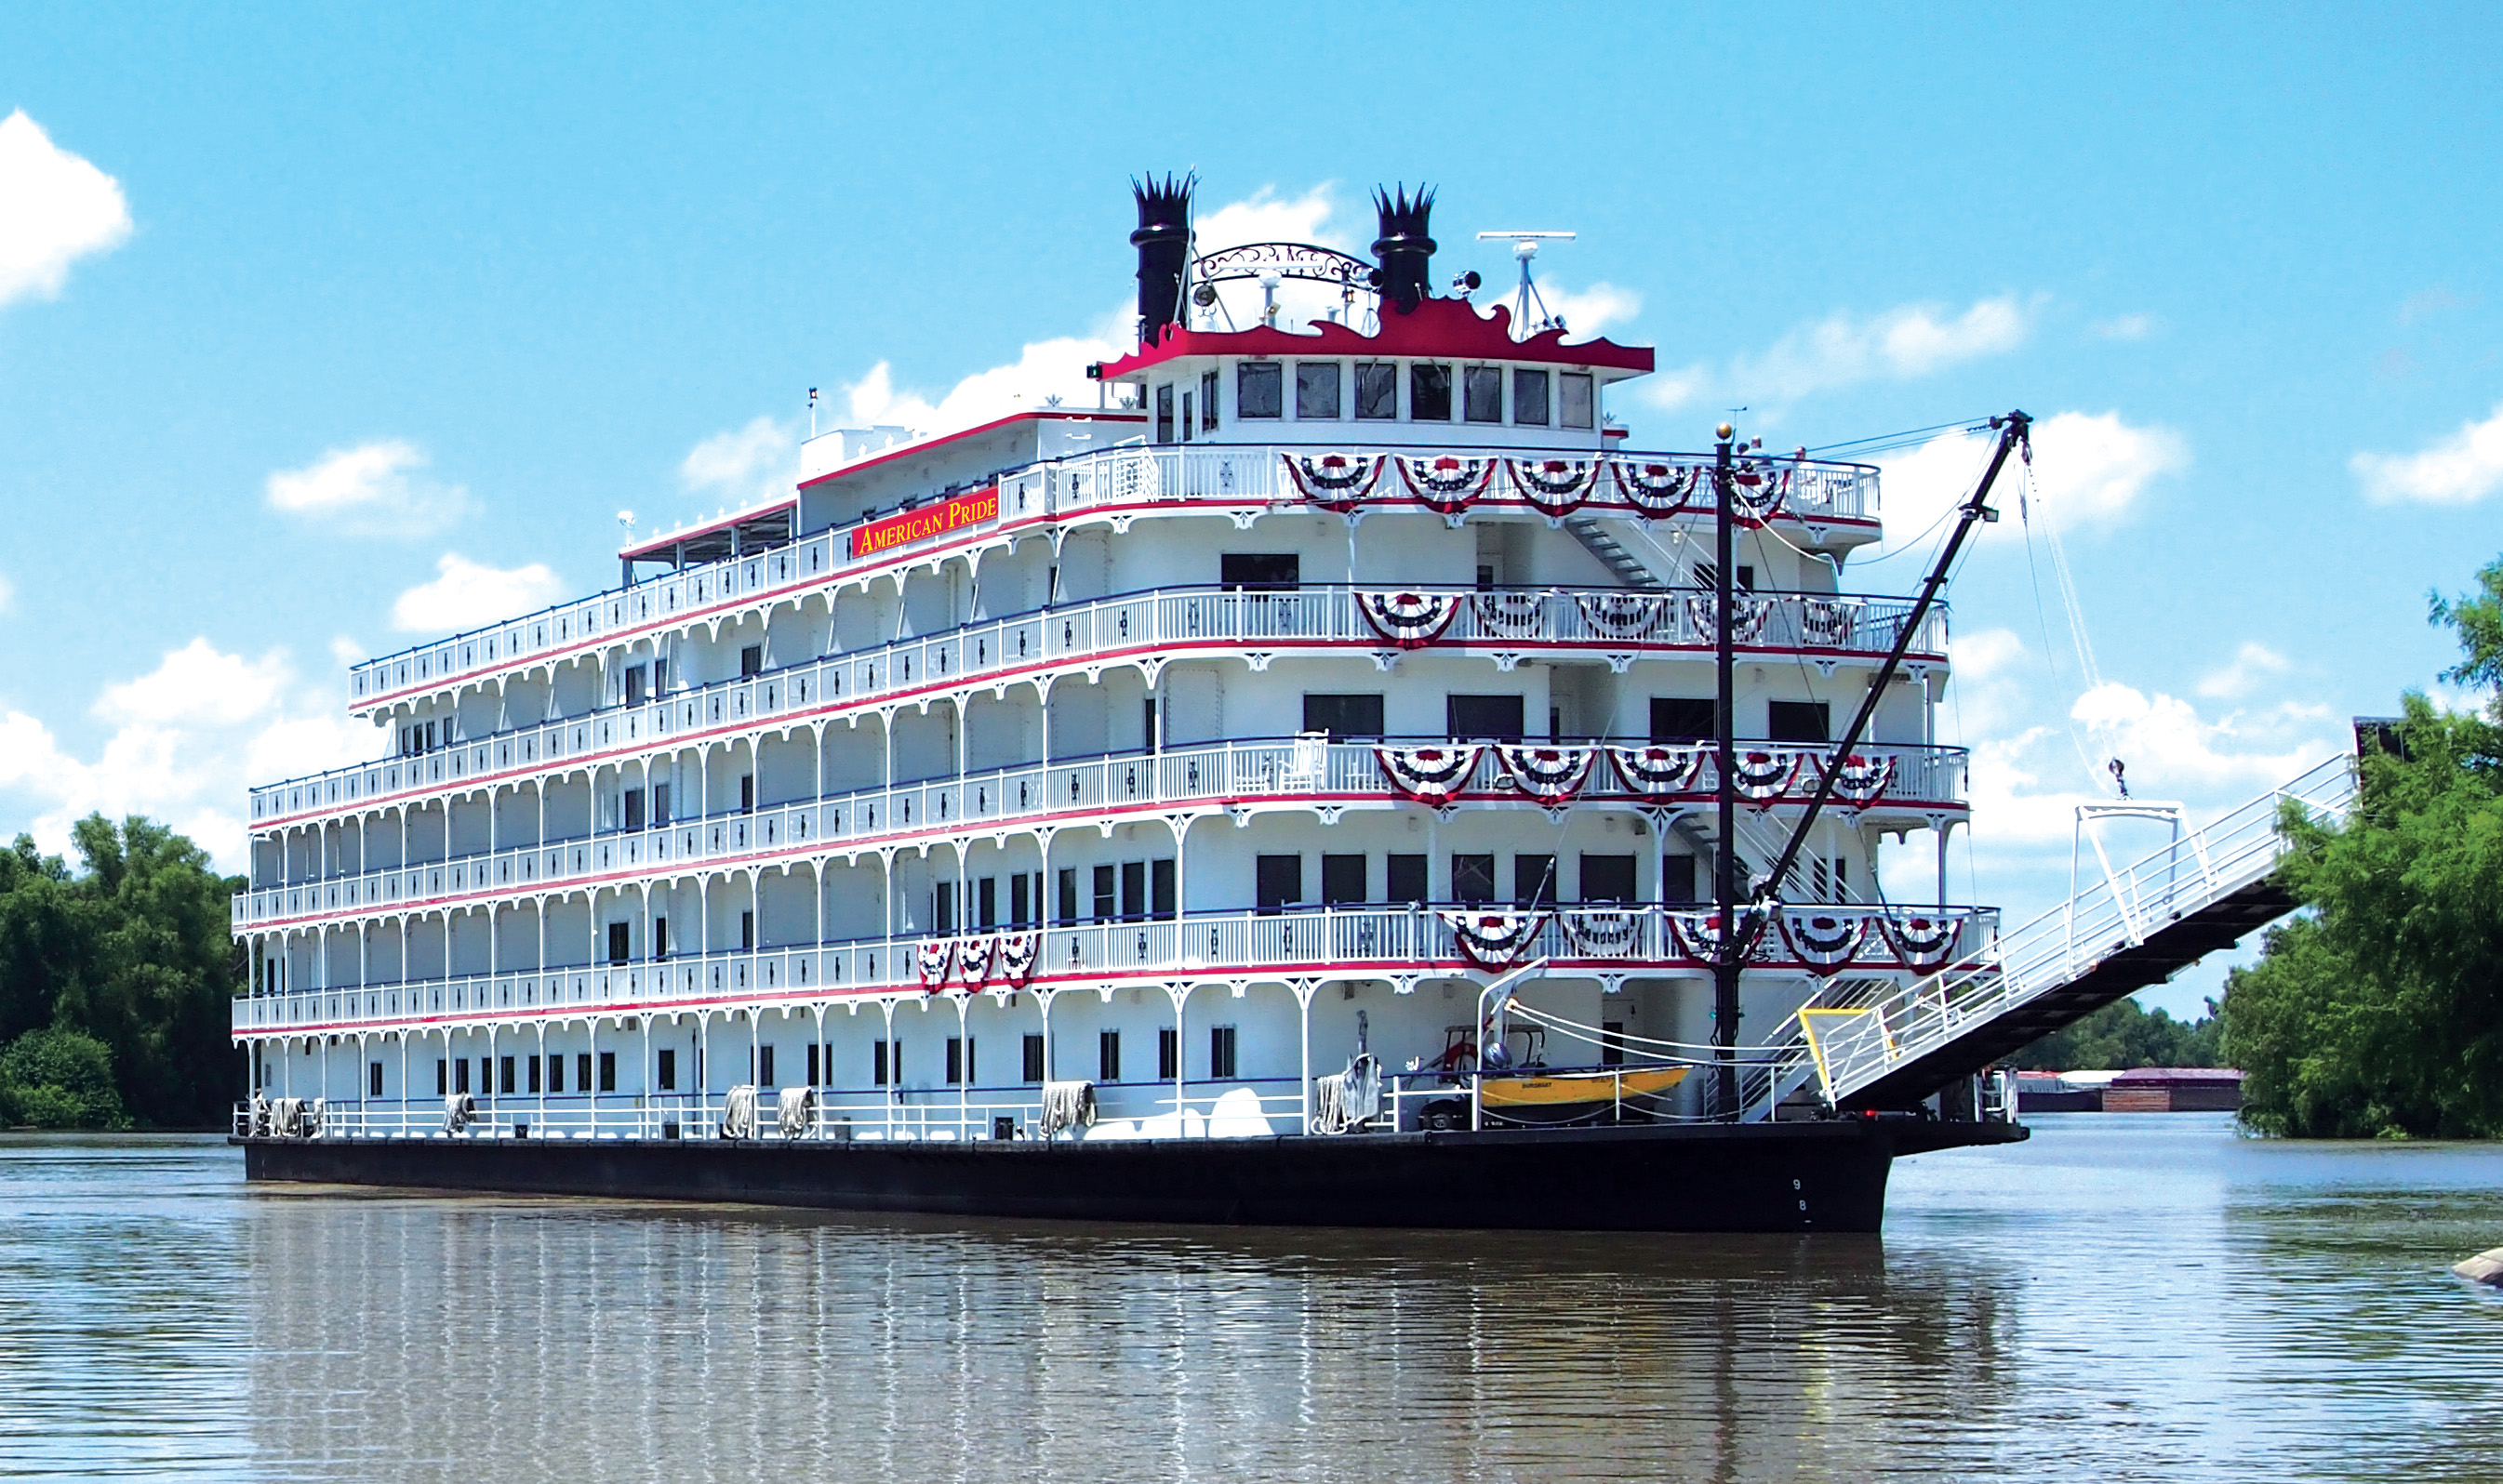 American Cruise Lines Introduces the “American Pride” to the Columbia